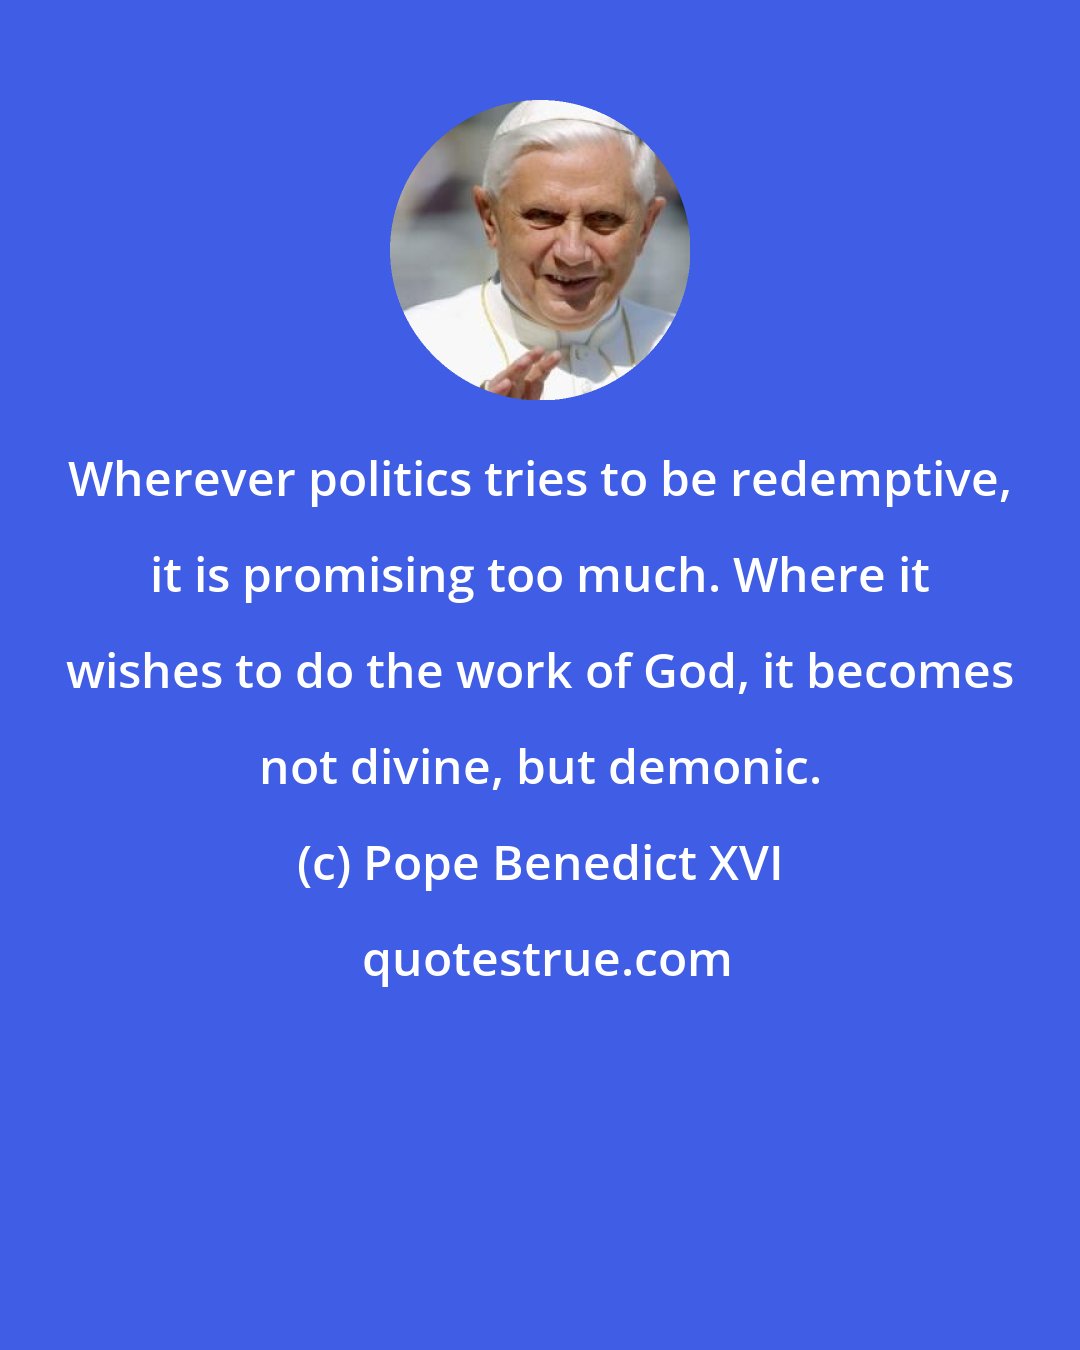 Pope Benedict XVI: Wherever politics tries to be redemptive, it is promising too much. Where it wishes to do the work of God, it becomes not divine, but demonic.